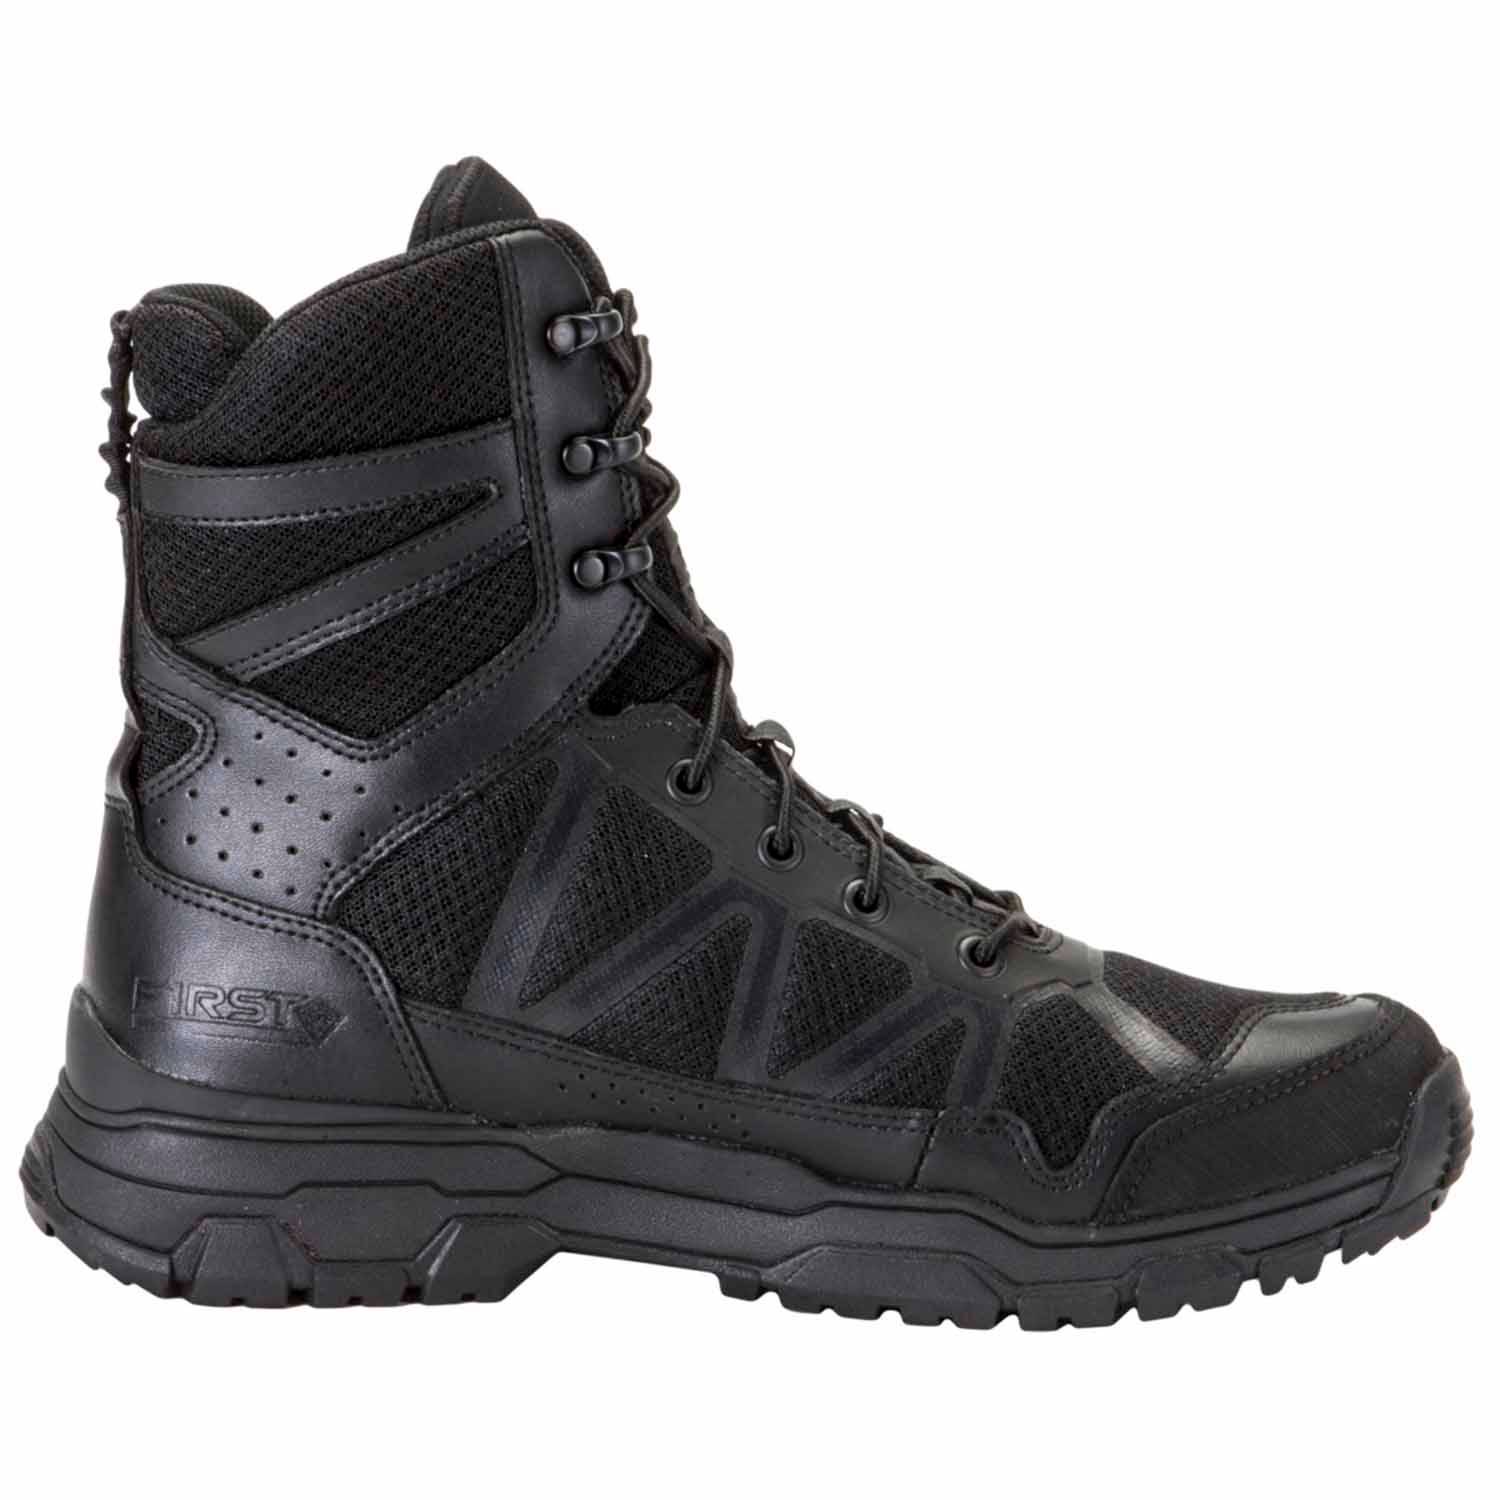 FIRST TACTICAL MEN'S 7" INCH OPERATOR BOOTS